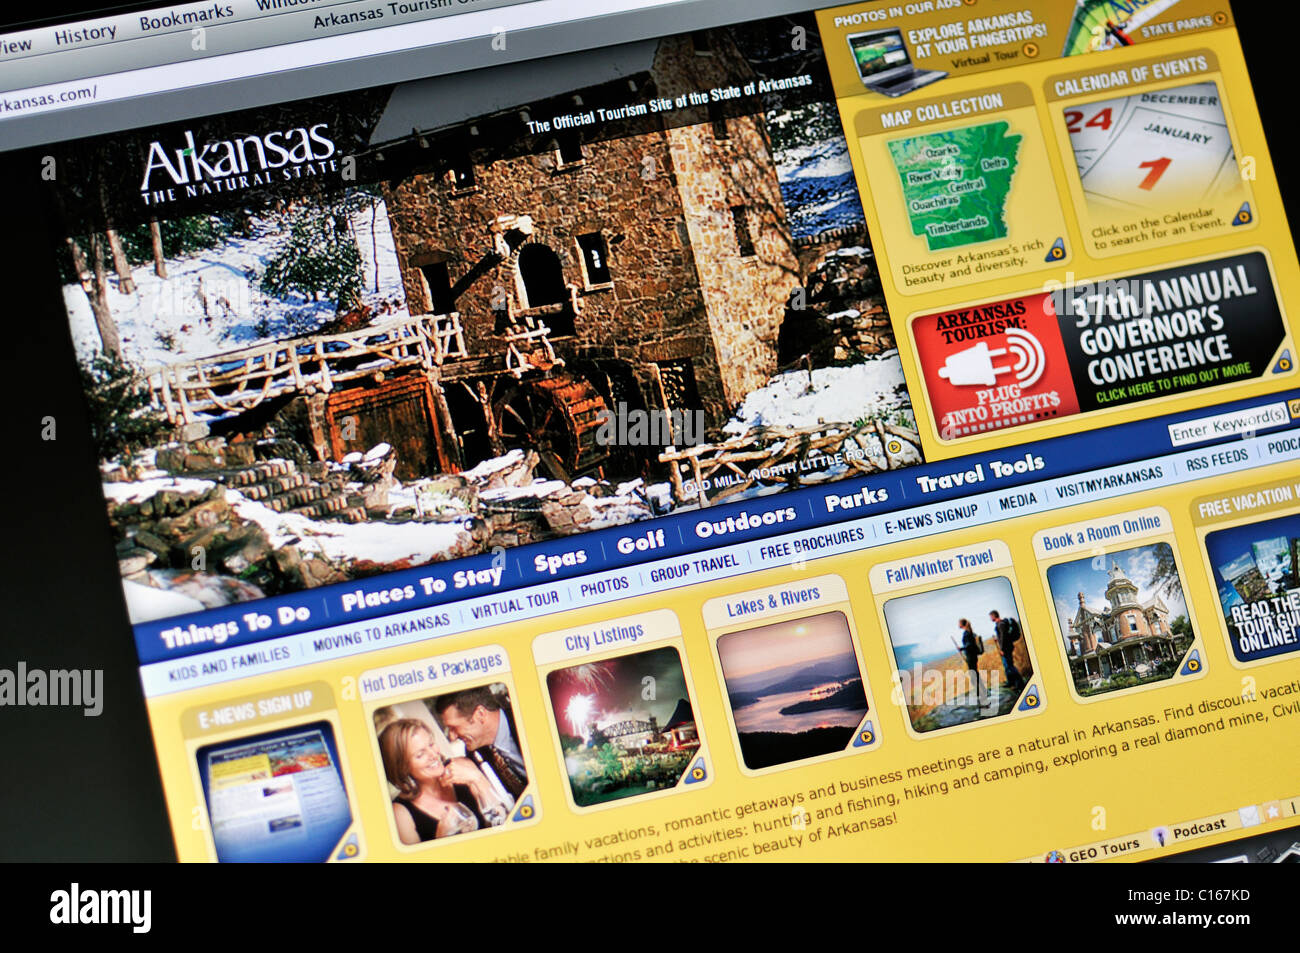 Arkansas official state tourism website Stock Photo